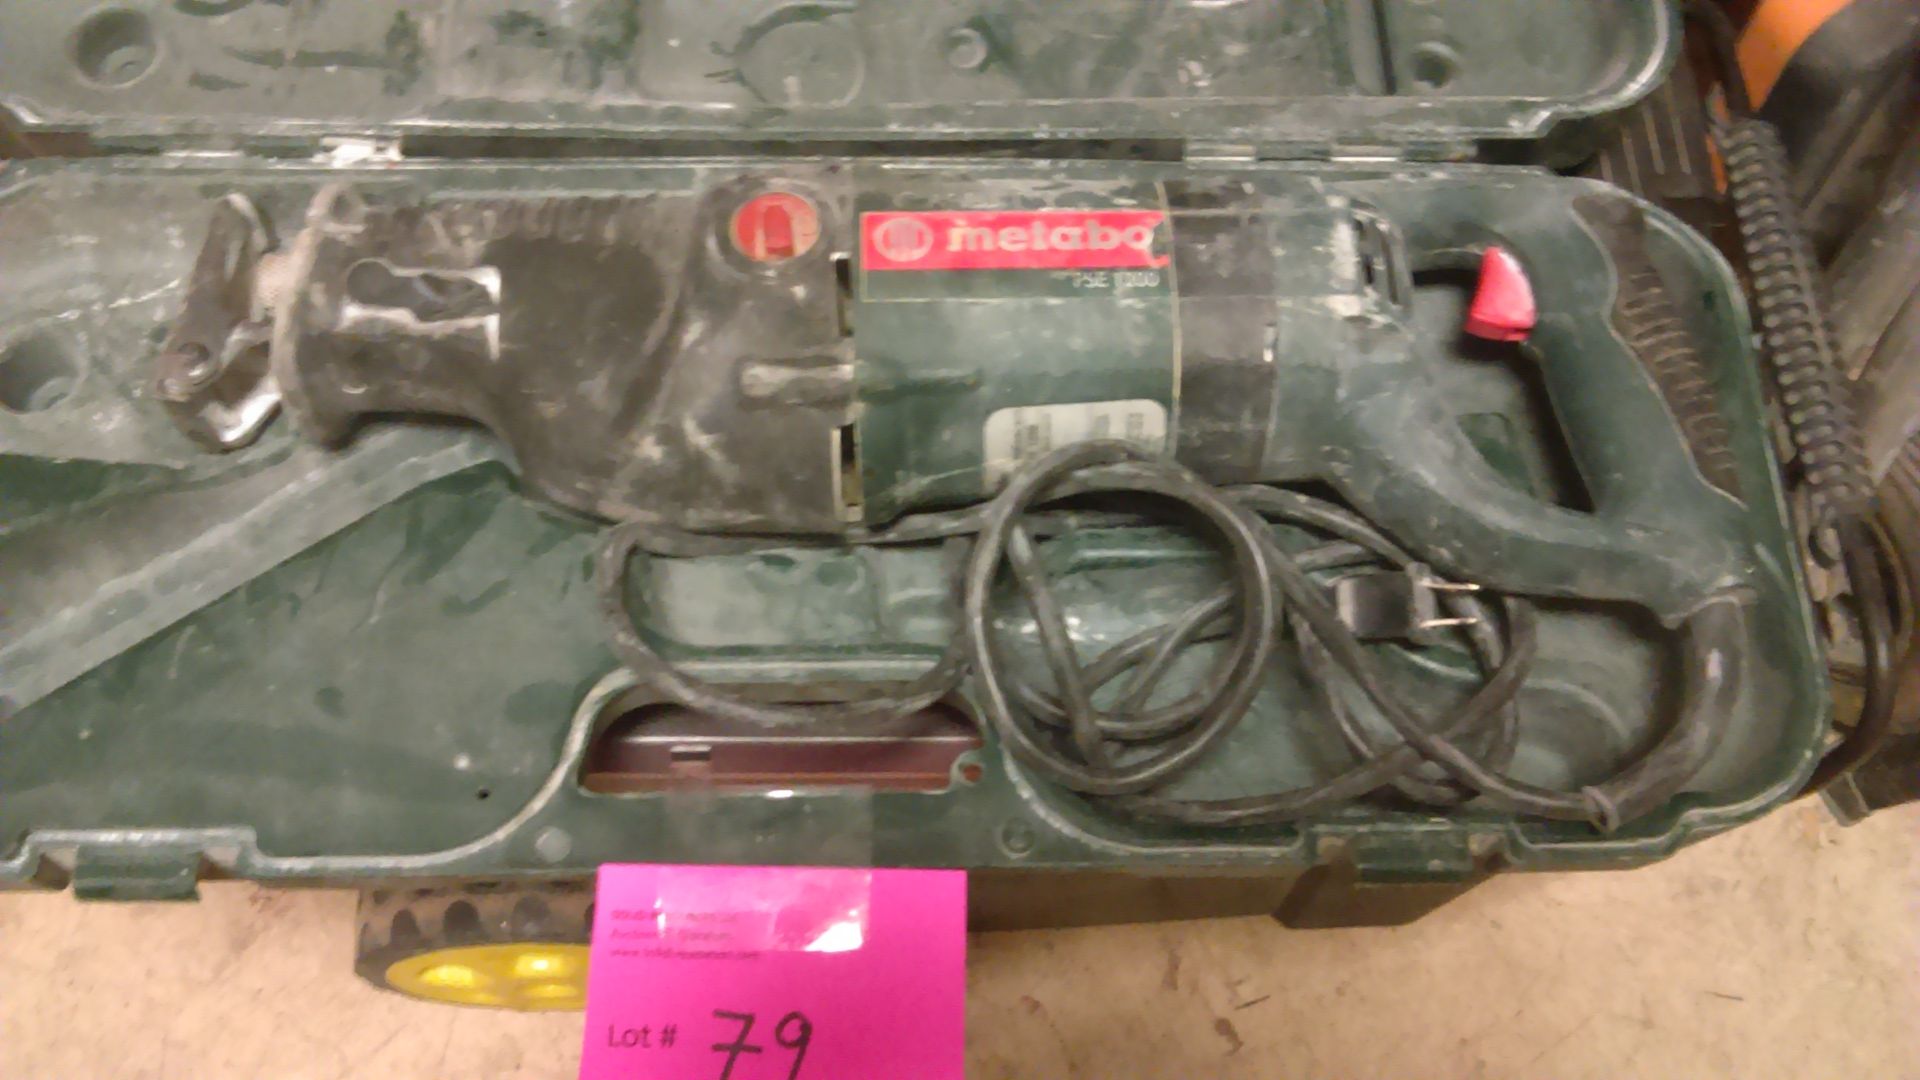 METABO PSE 1200 SAWZALL, CORDED, IN CASE (CASE DOES NOT CLOSE COMPLETELY)